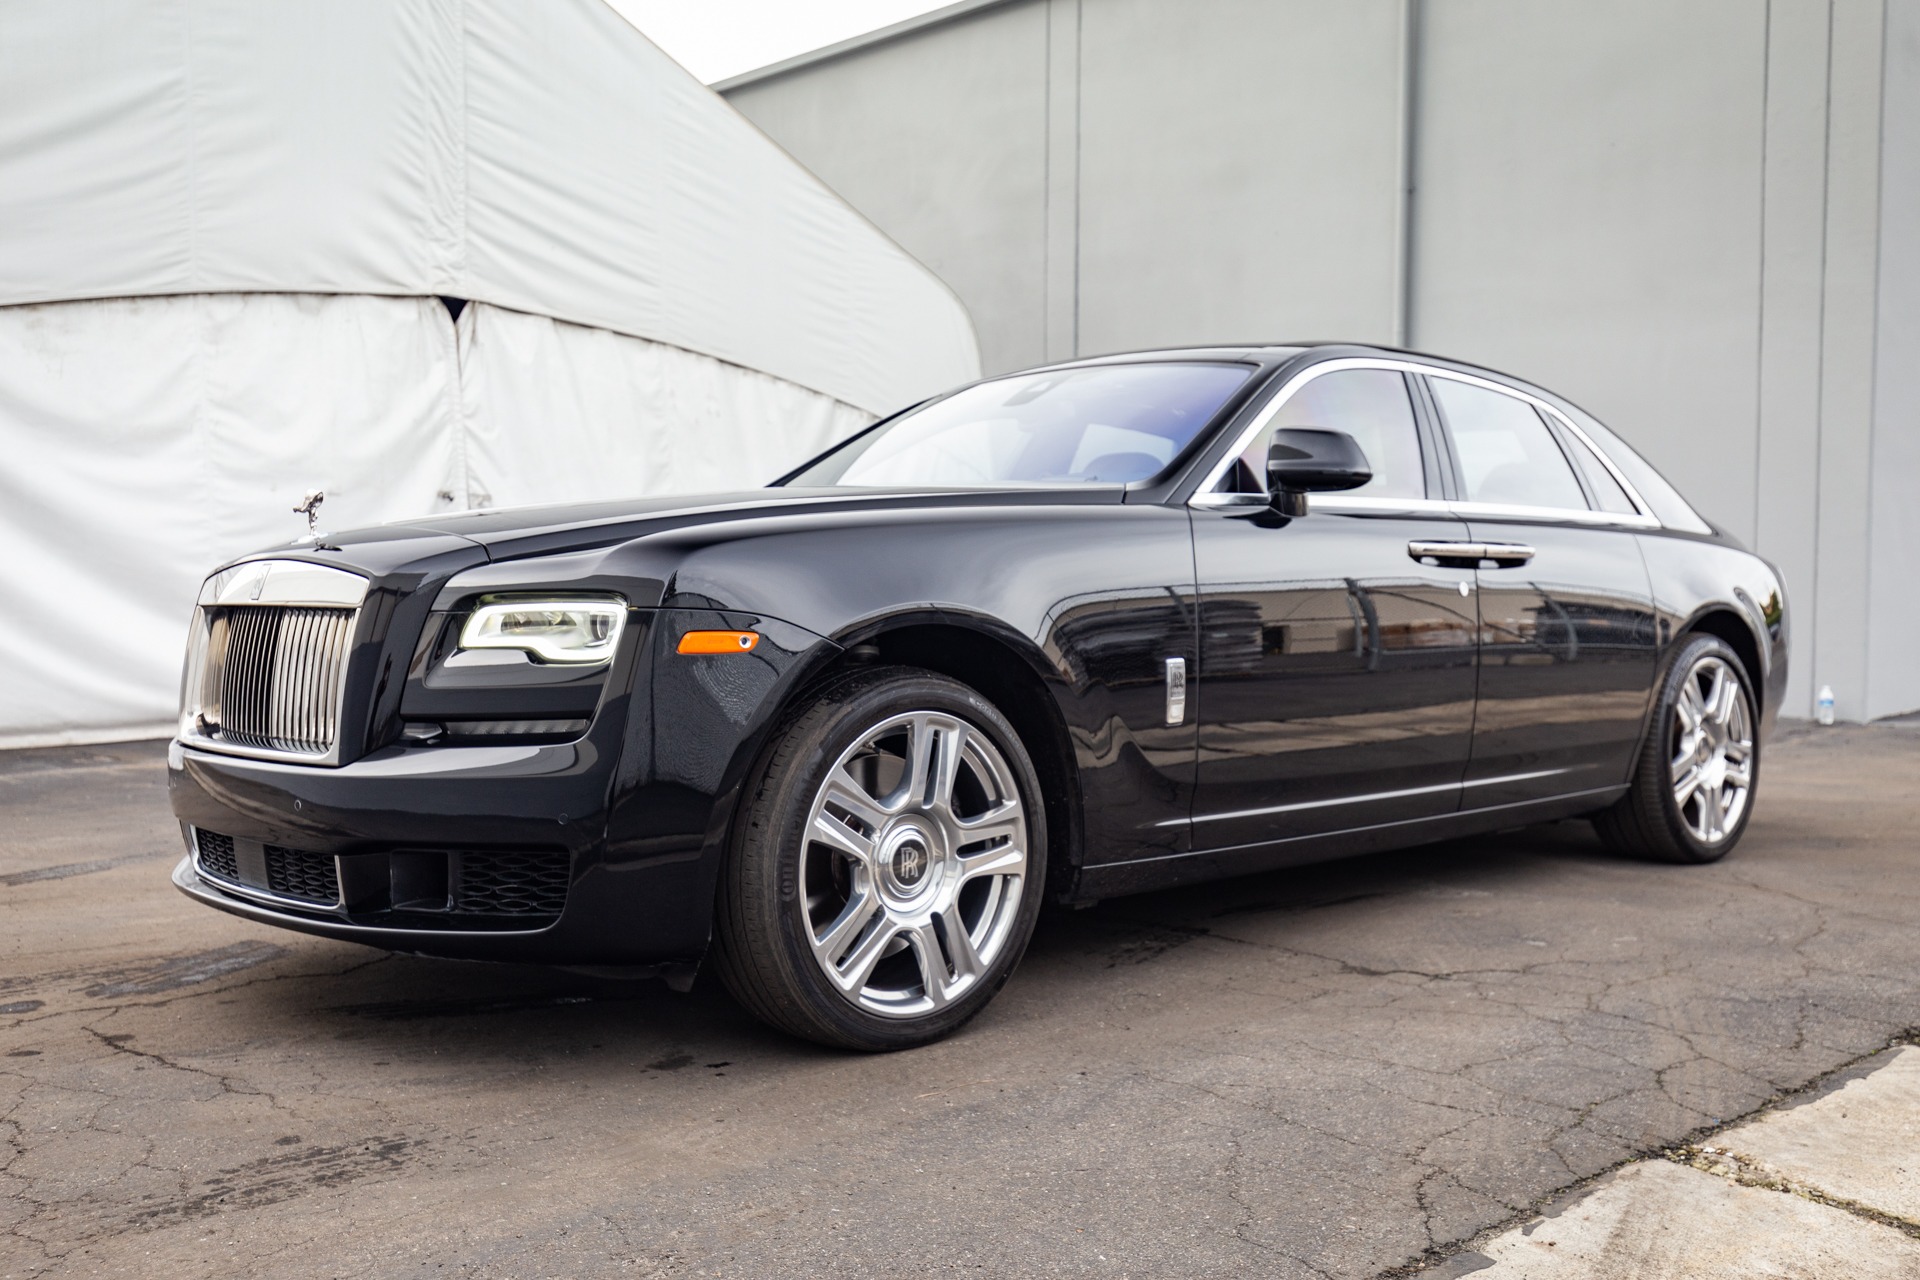 Used 2018 RollsRoyce Ghost for Sale Right Now  Autotrader